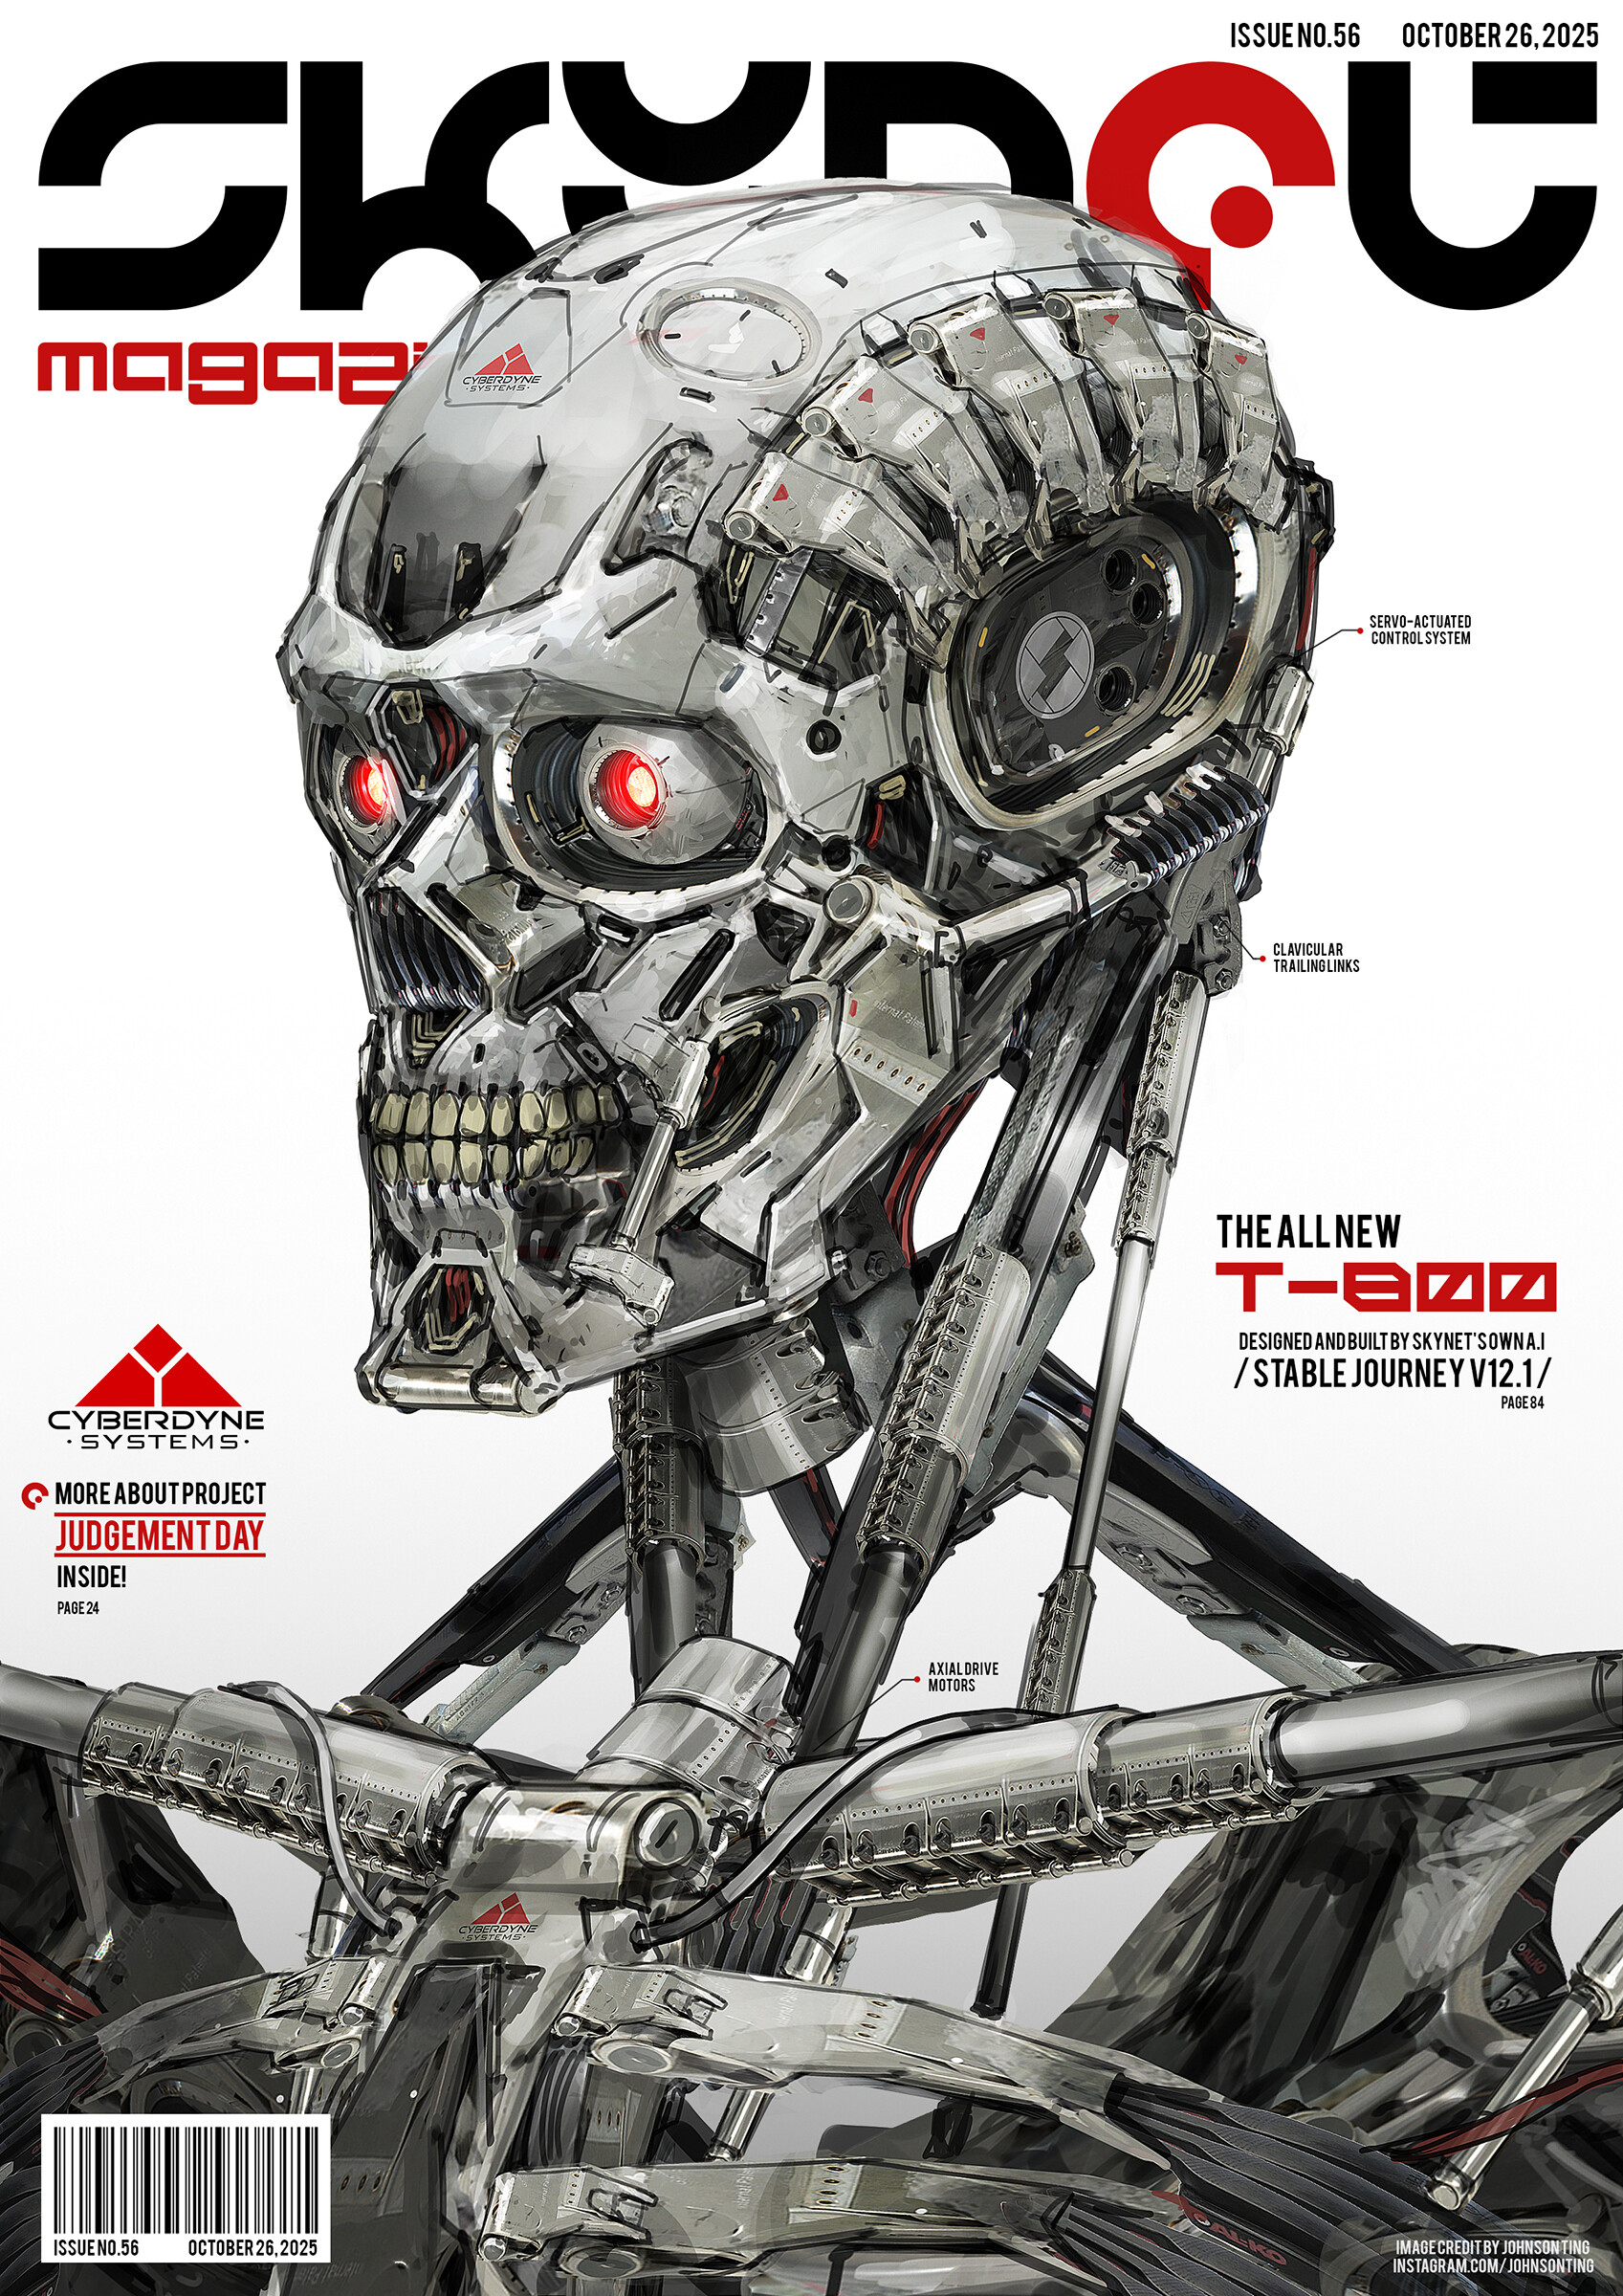 Johnson Ting Drawing Terminator Androids Robot Portrait Skynet Magazine Cover Vertical 1697x2400